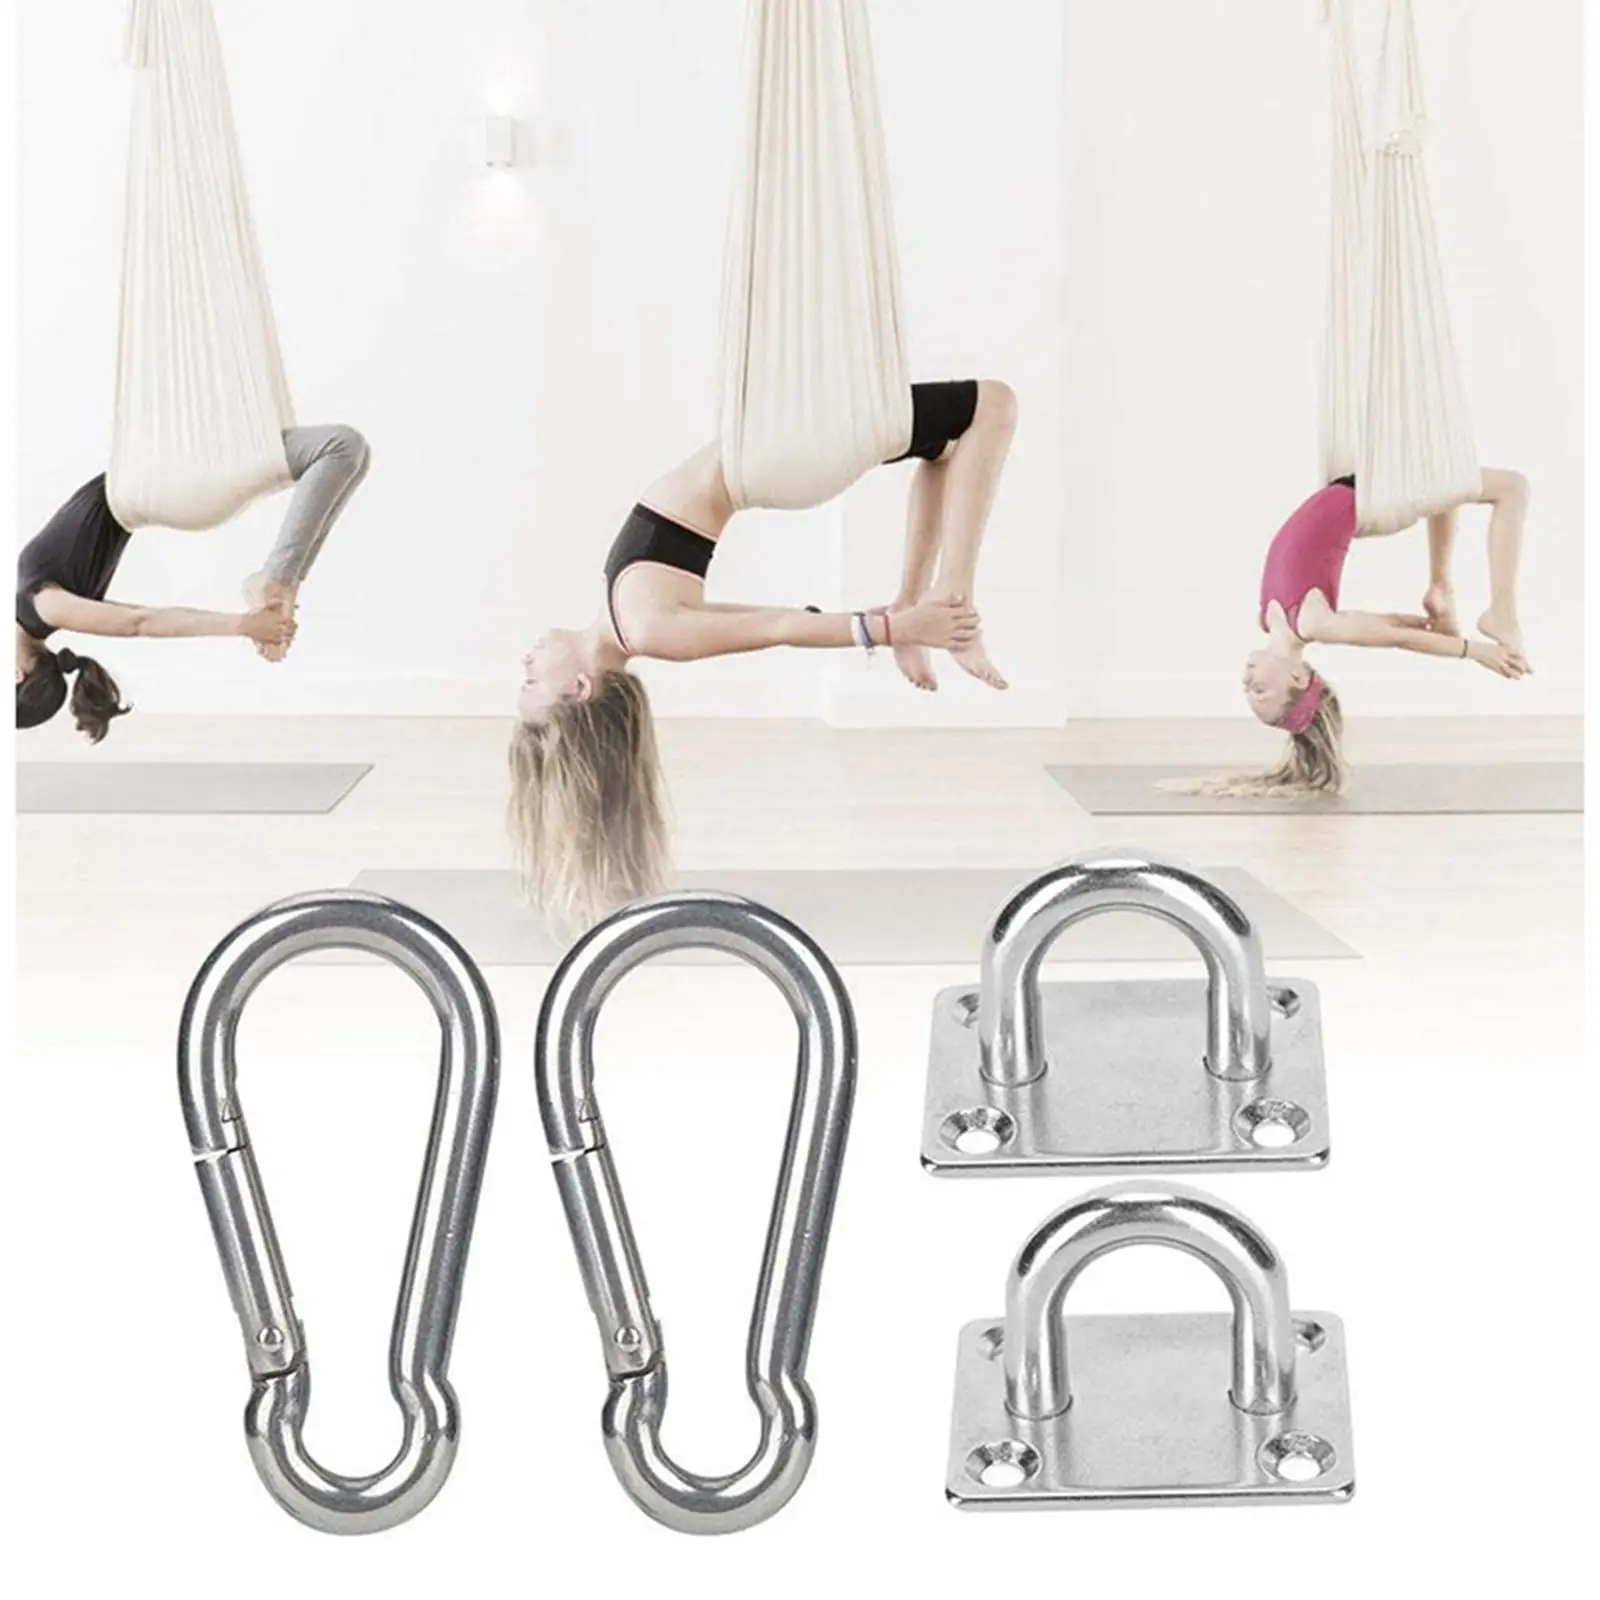 Sturdy Ceiling Anchor Buckle High Strength Aerial Yoga Hanging Hook Hanger